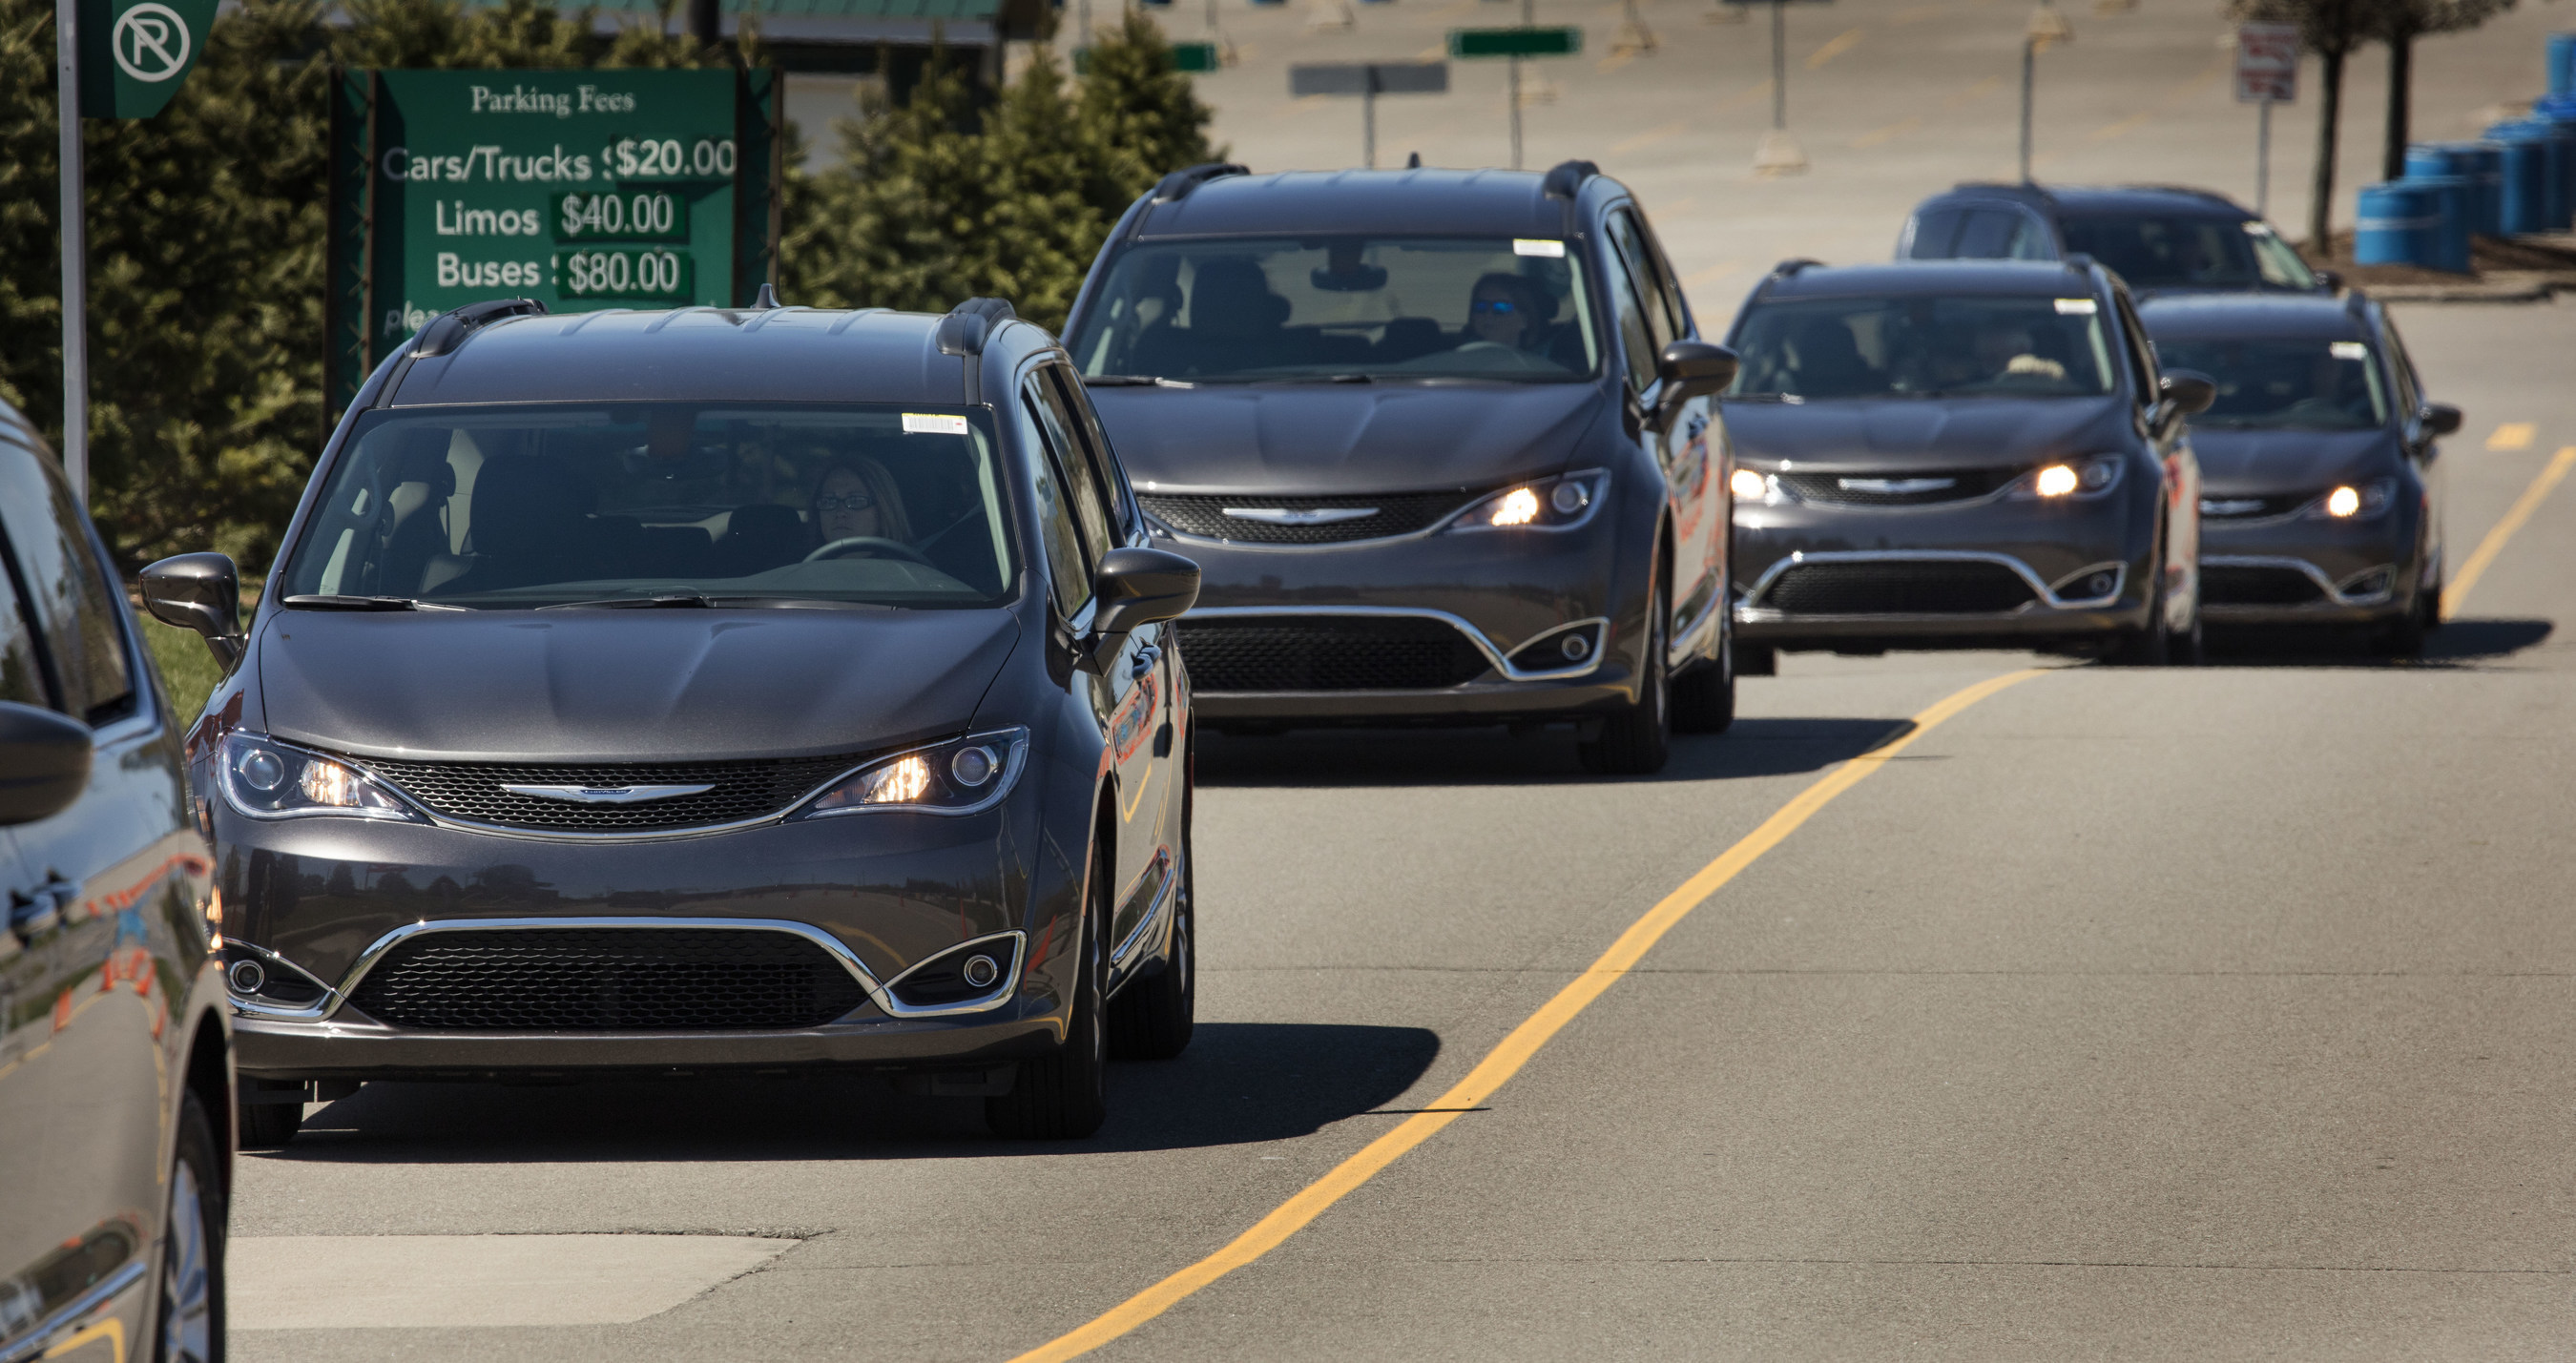 In the largest ever Drive Away hosted by FCA US, more than 200 all-new 2017 Chrysler Pacifica minivans were showcased side-by-side before making their way to dealerships across the Midwest.